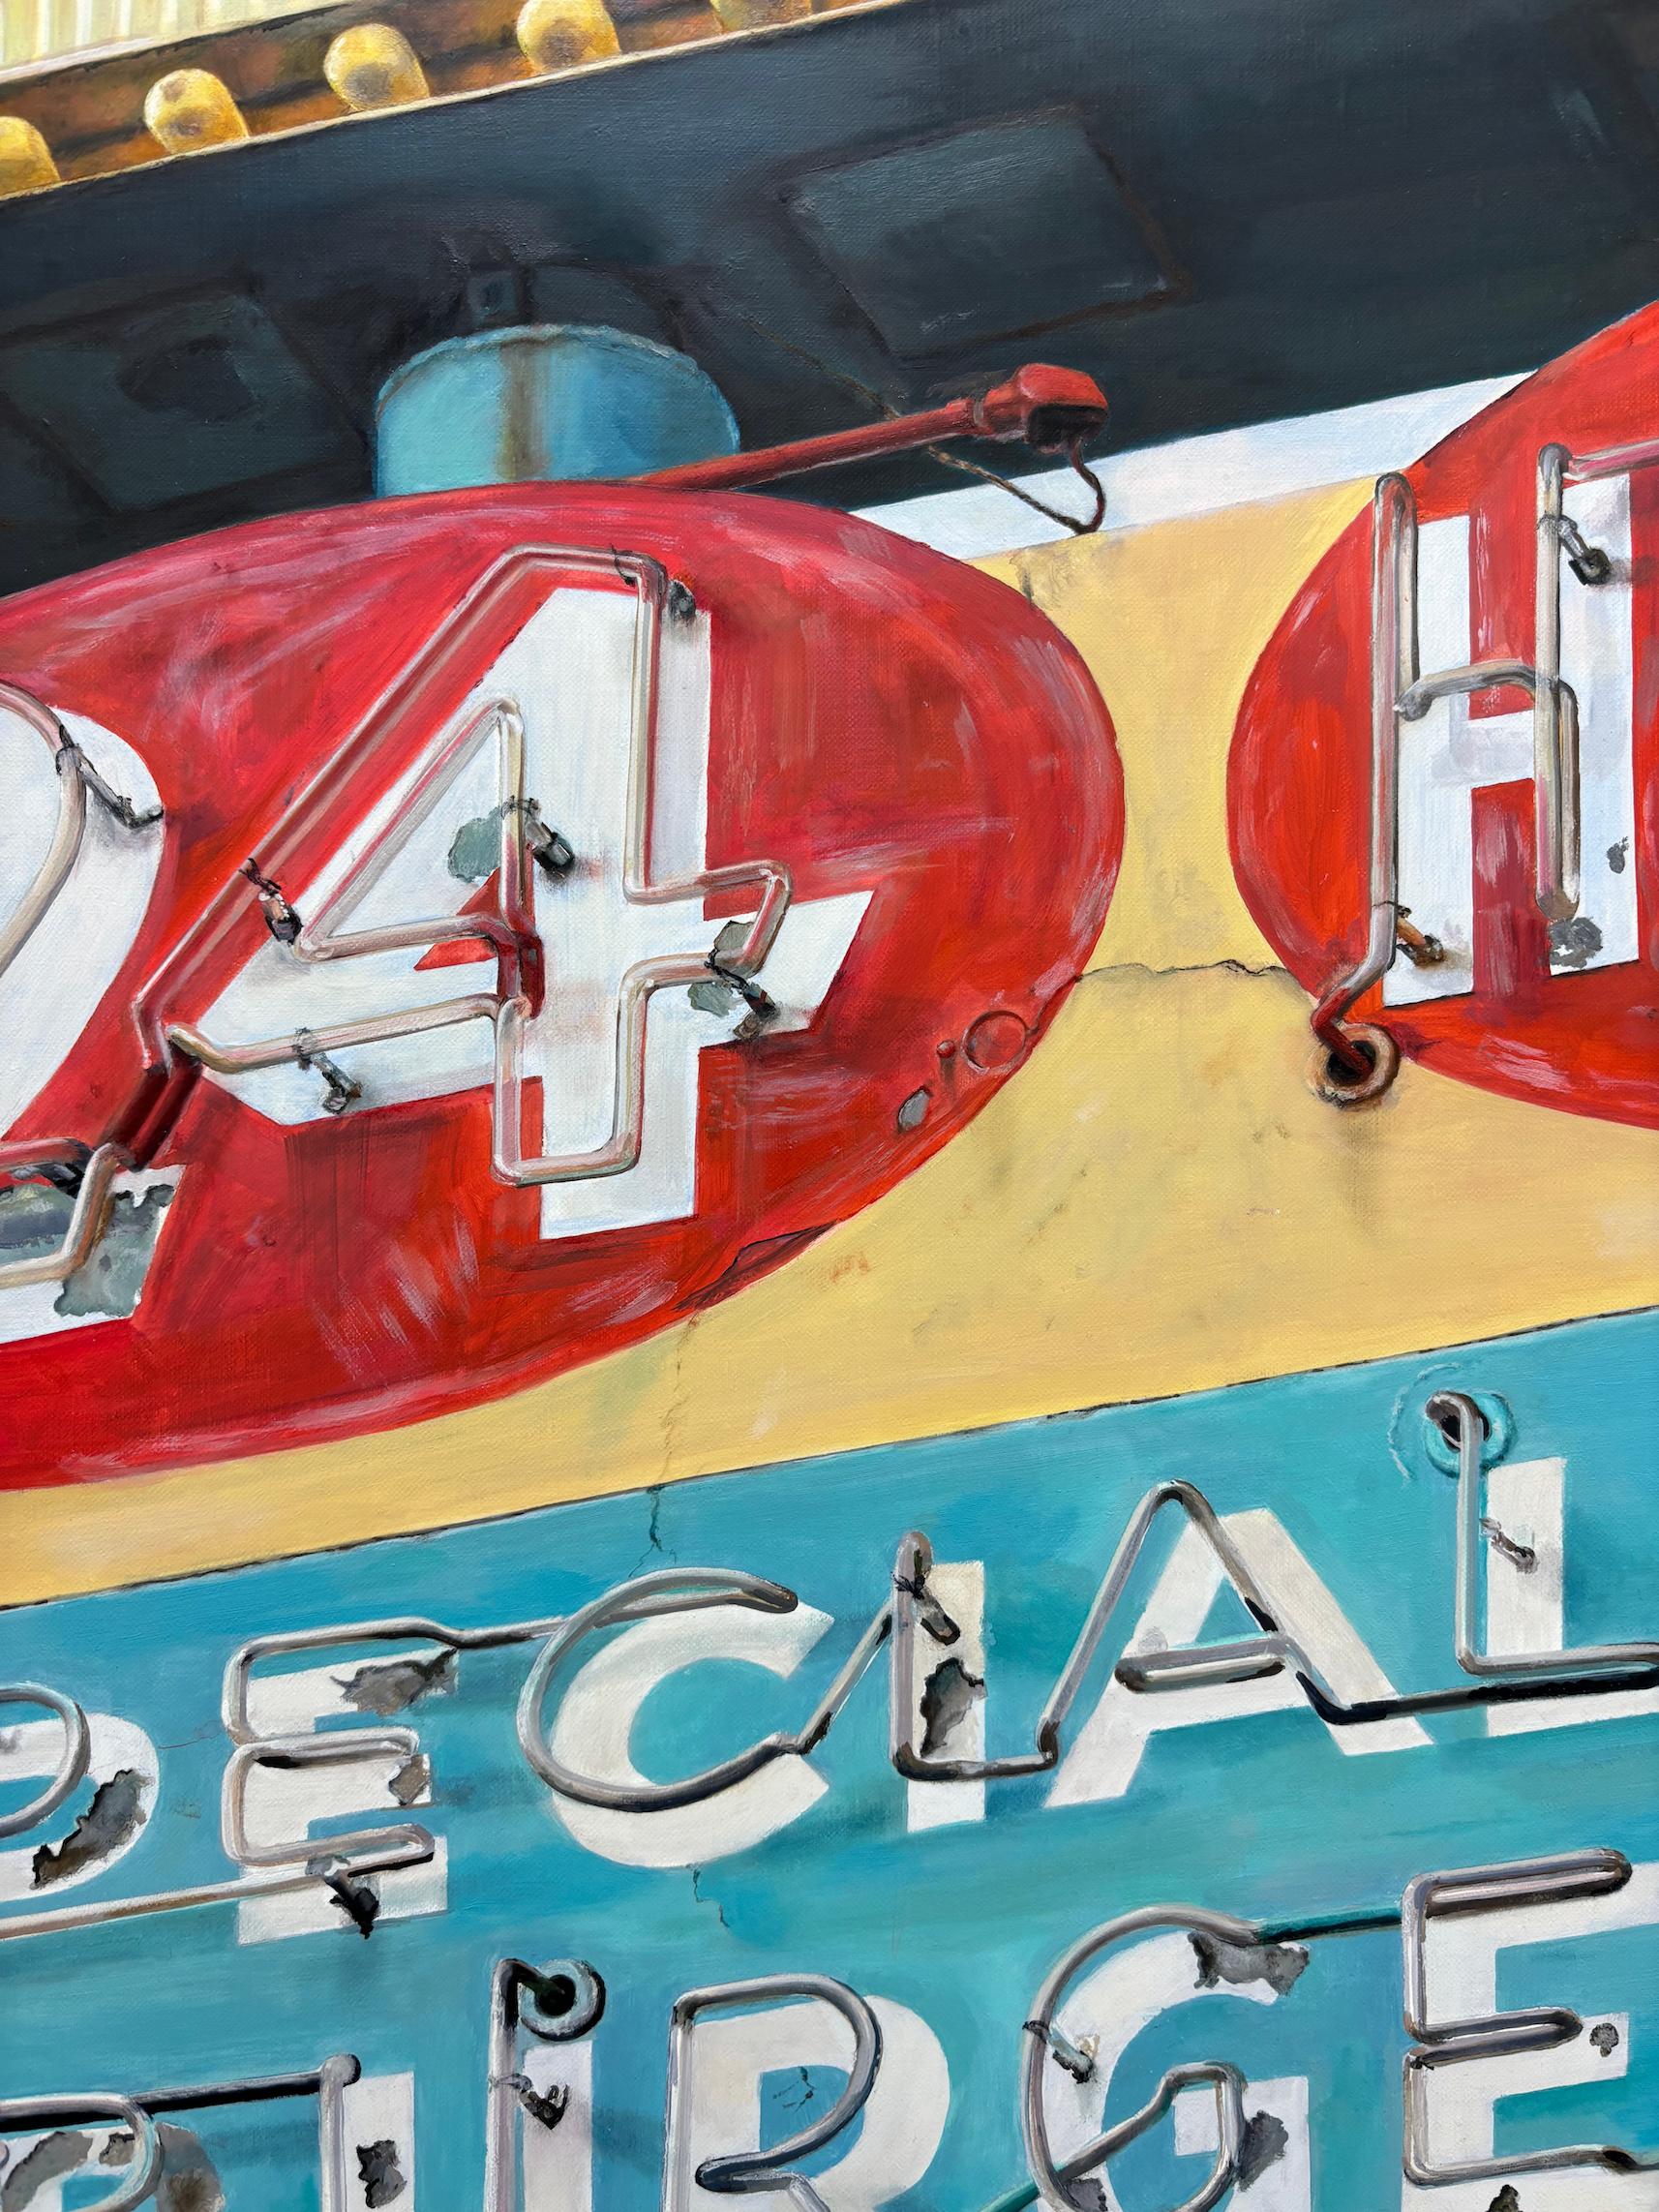 Hot Cake House - Photorealist Painting by Terry Thompson